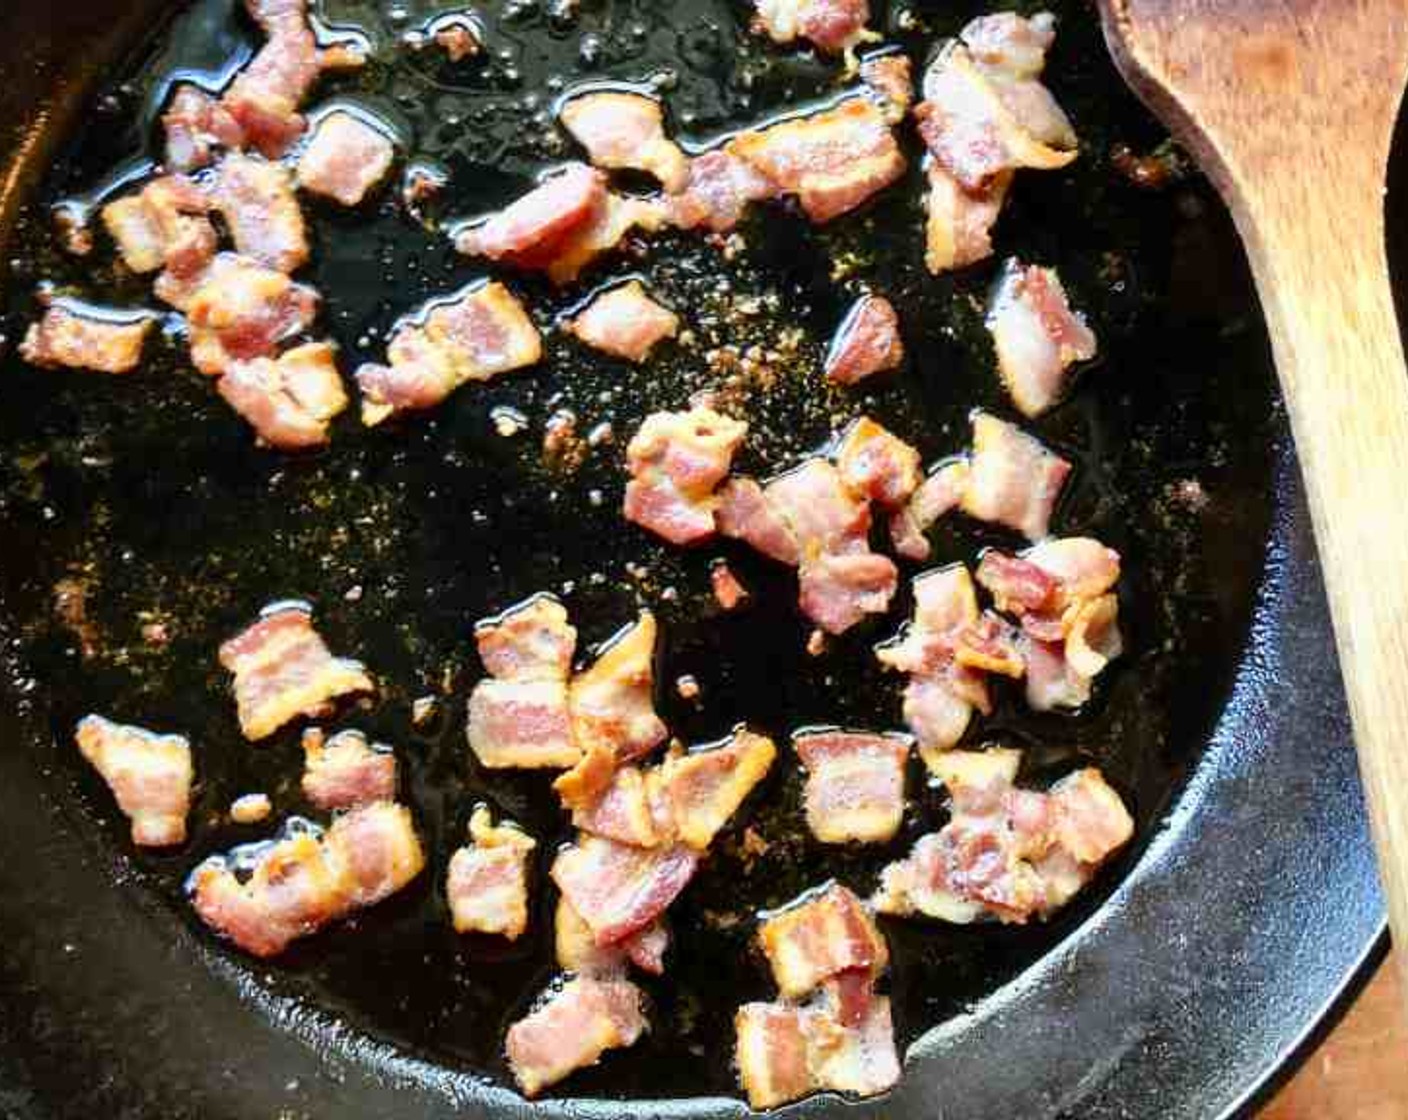 step 8 To the same skillet, add Bacon (4 oz) and cook until the bacon is crisp and the fat renders about 5 minutes.